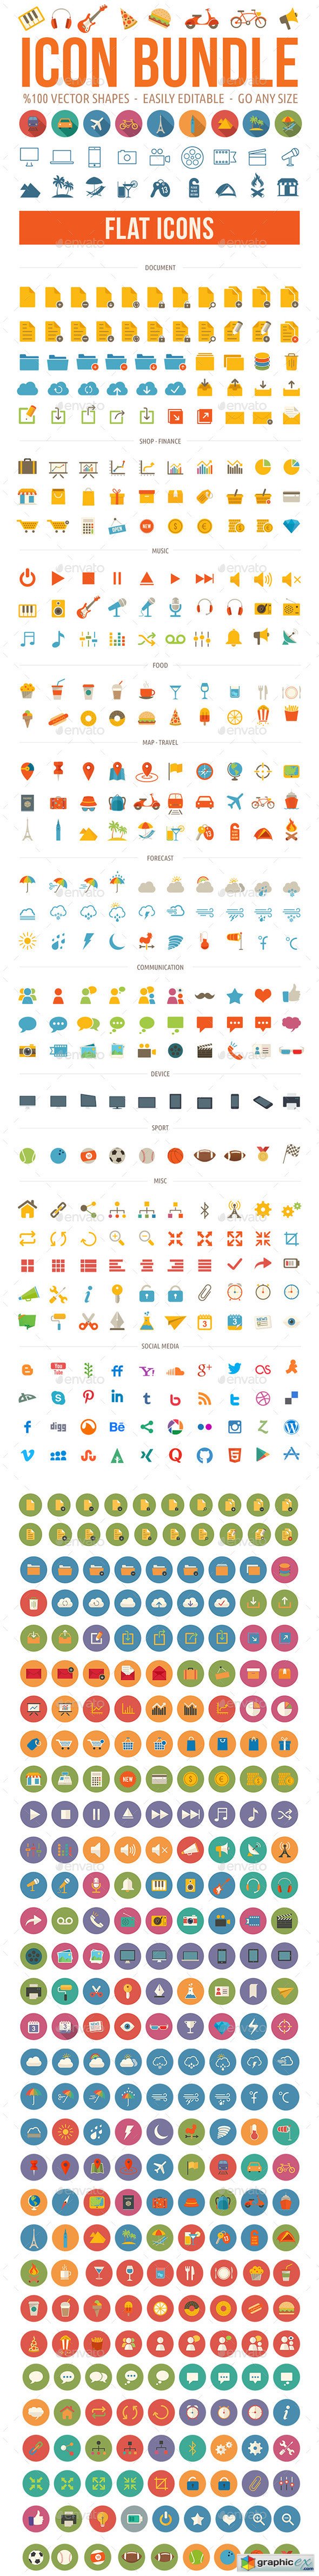 2000 Vector Icons